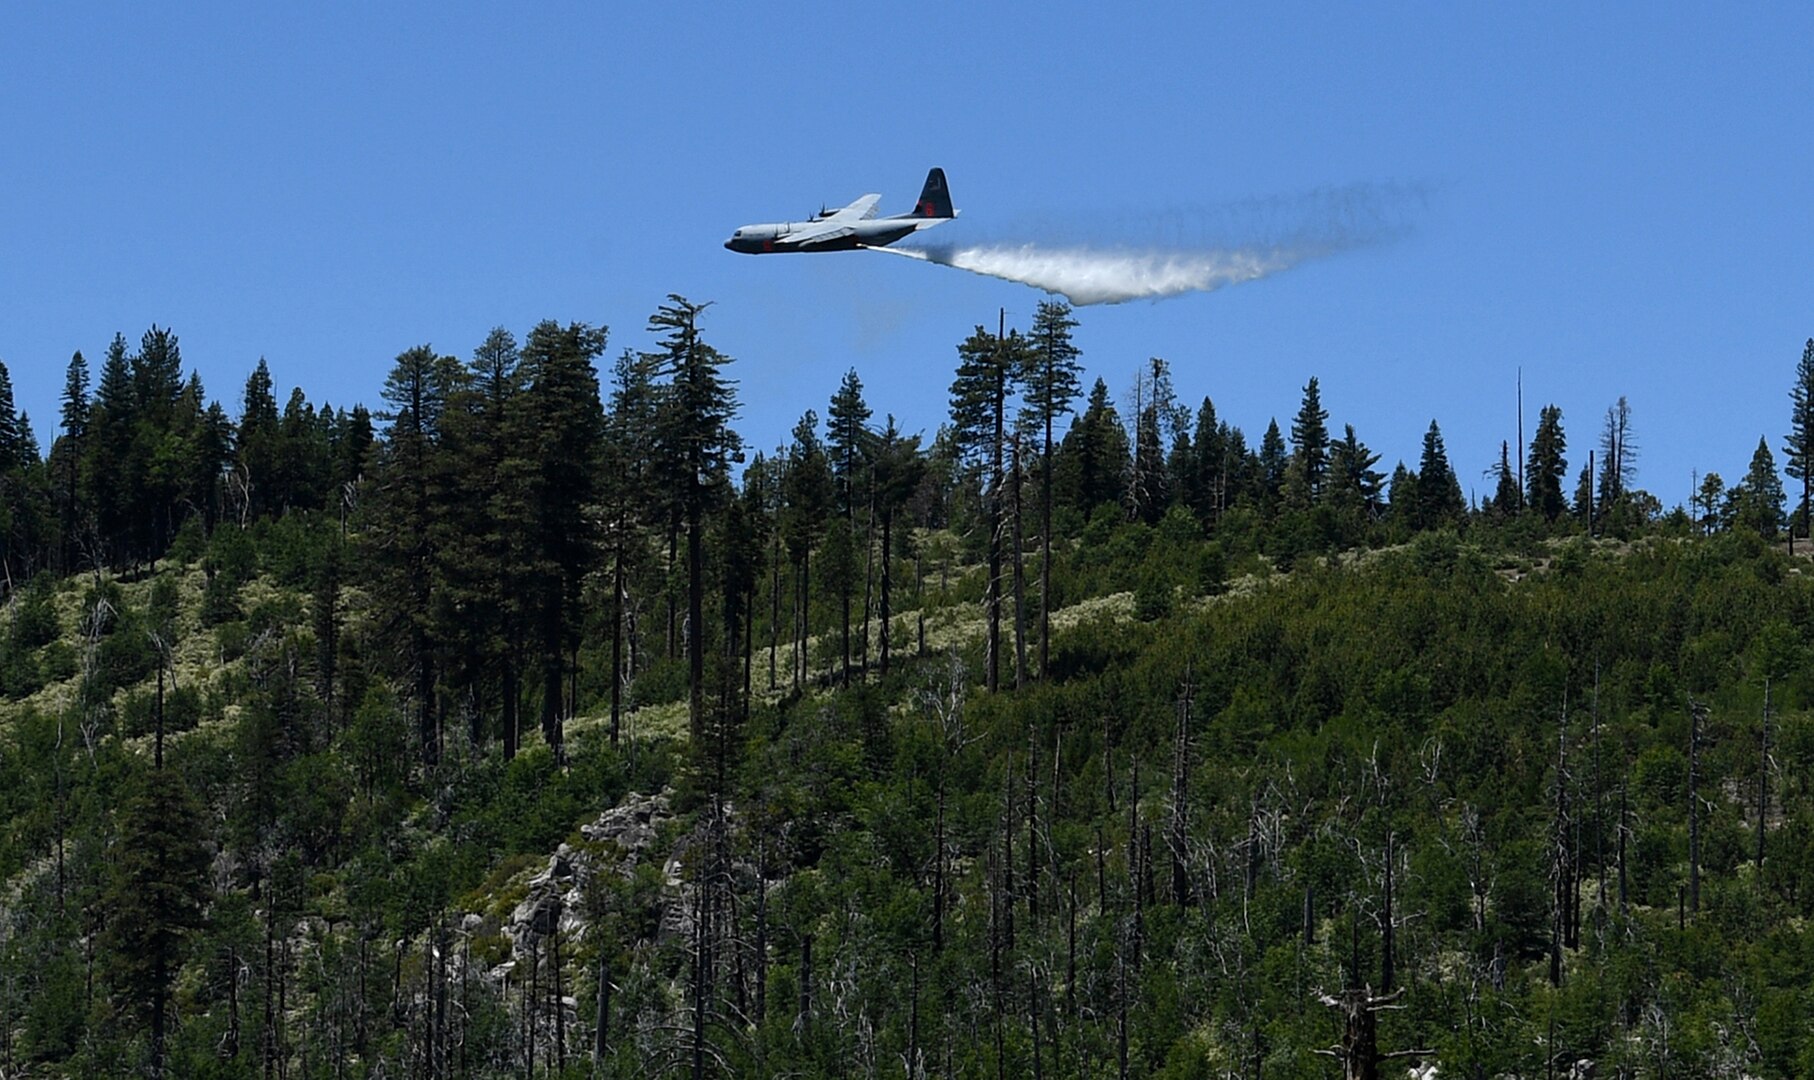 About 150 feet above a tree line, a California Air National Guard C-130 aircraft releases 3,000 gallons of water, covering nearly a quarter mile, during aerial wildland firefighting training June 15-19, 2020, at the Tahoe National Forest.